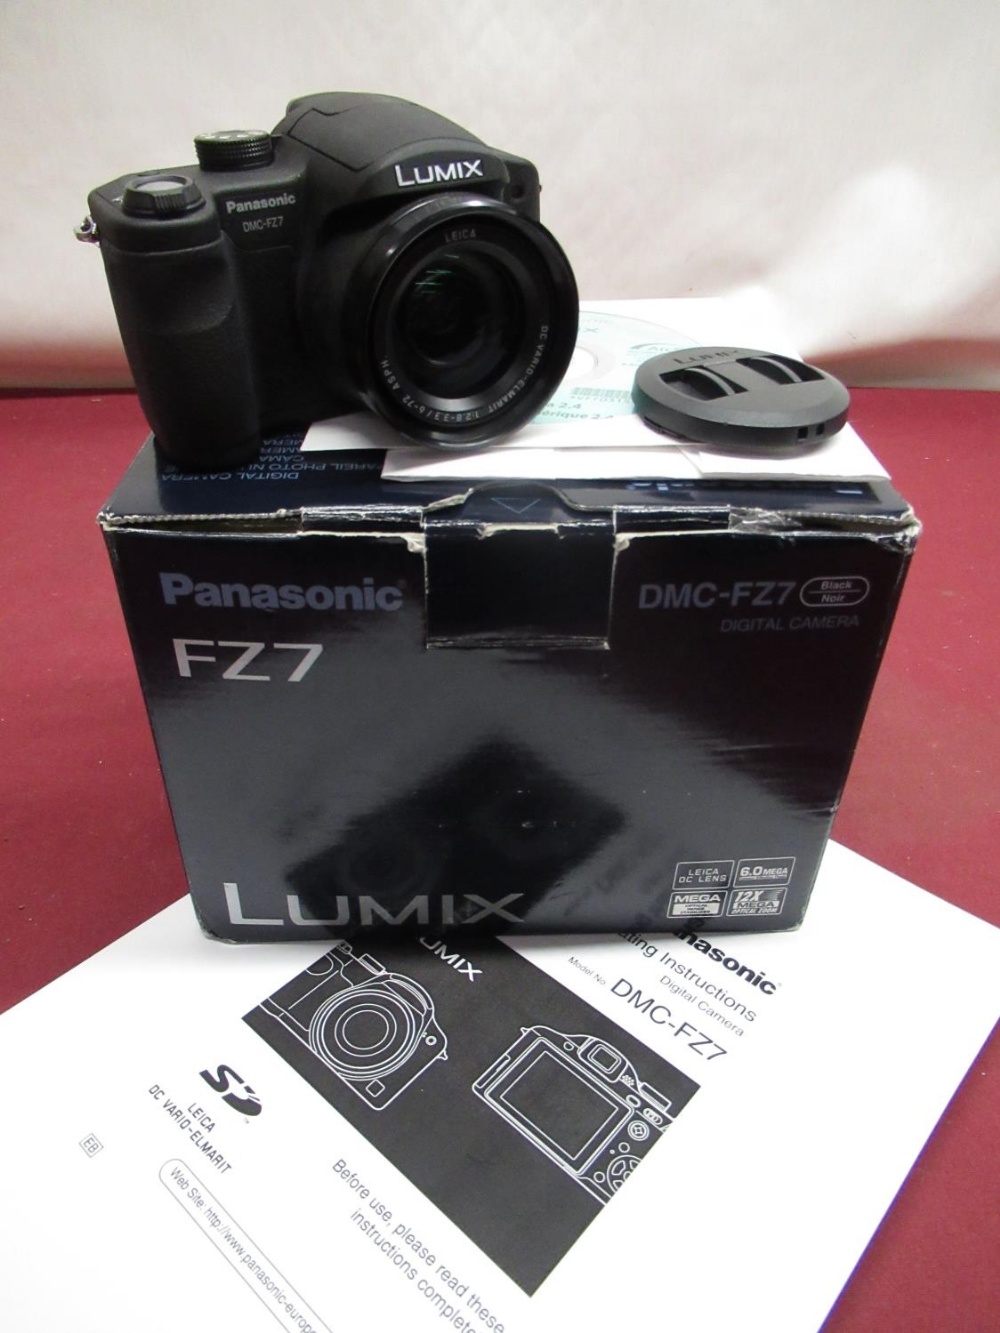 Panasonic FZ7 digital camera with Leica lens, boxed with instructions